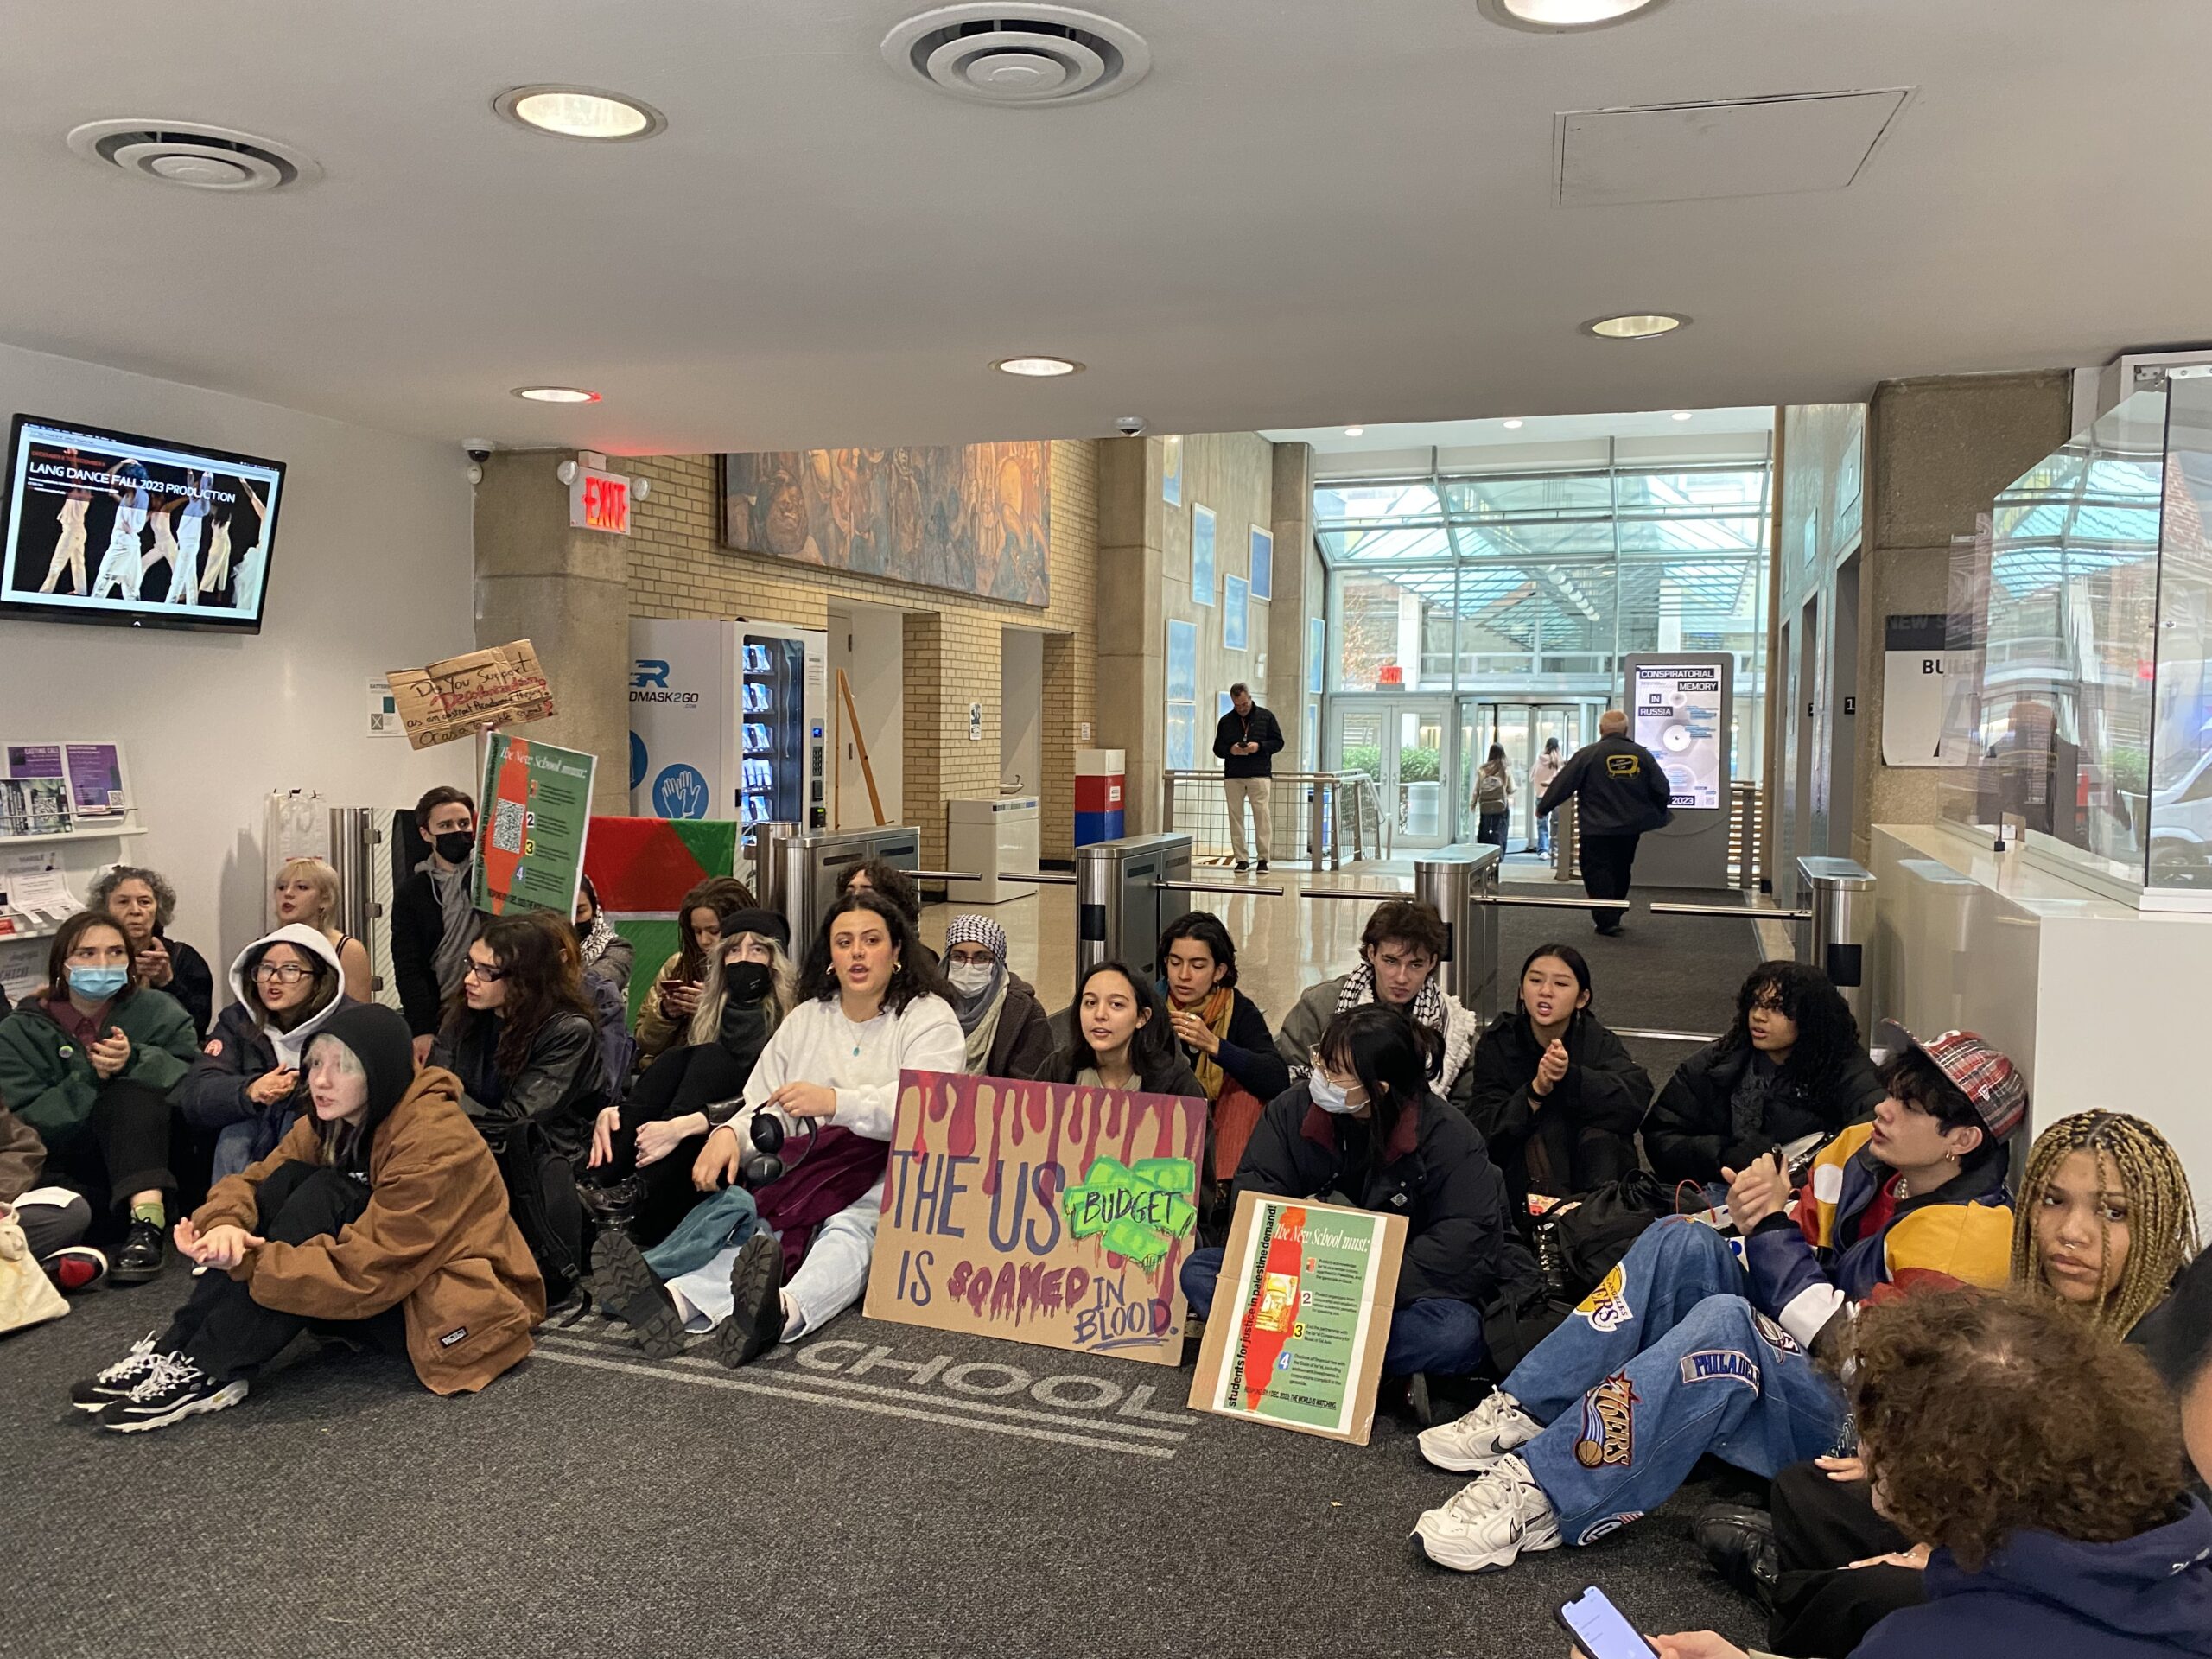 A group of demonstrators seated in front of Alvin Johnson/J.M. Kaplan Hall on East 12th Street. In the middle, a sign says “The US budget is soaked in blood.”